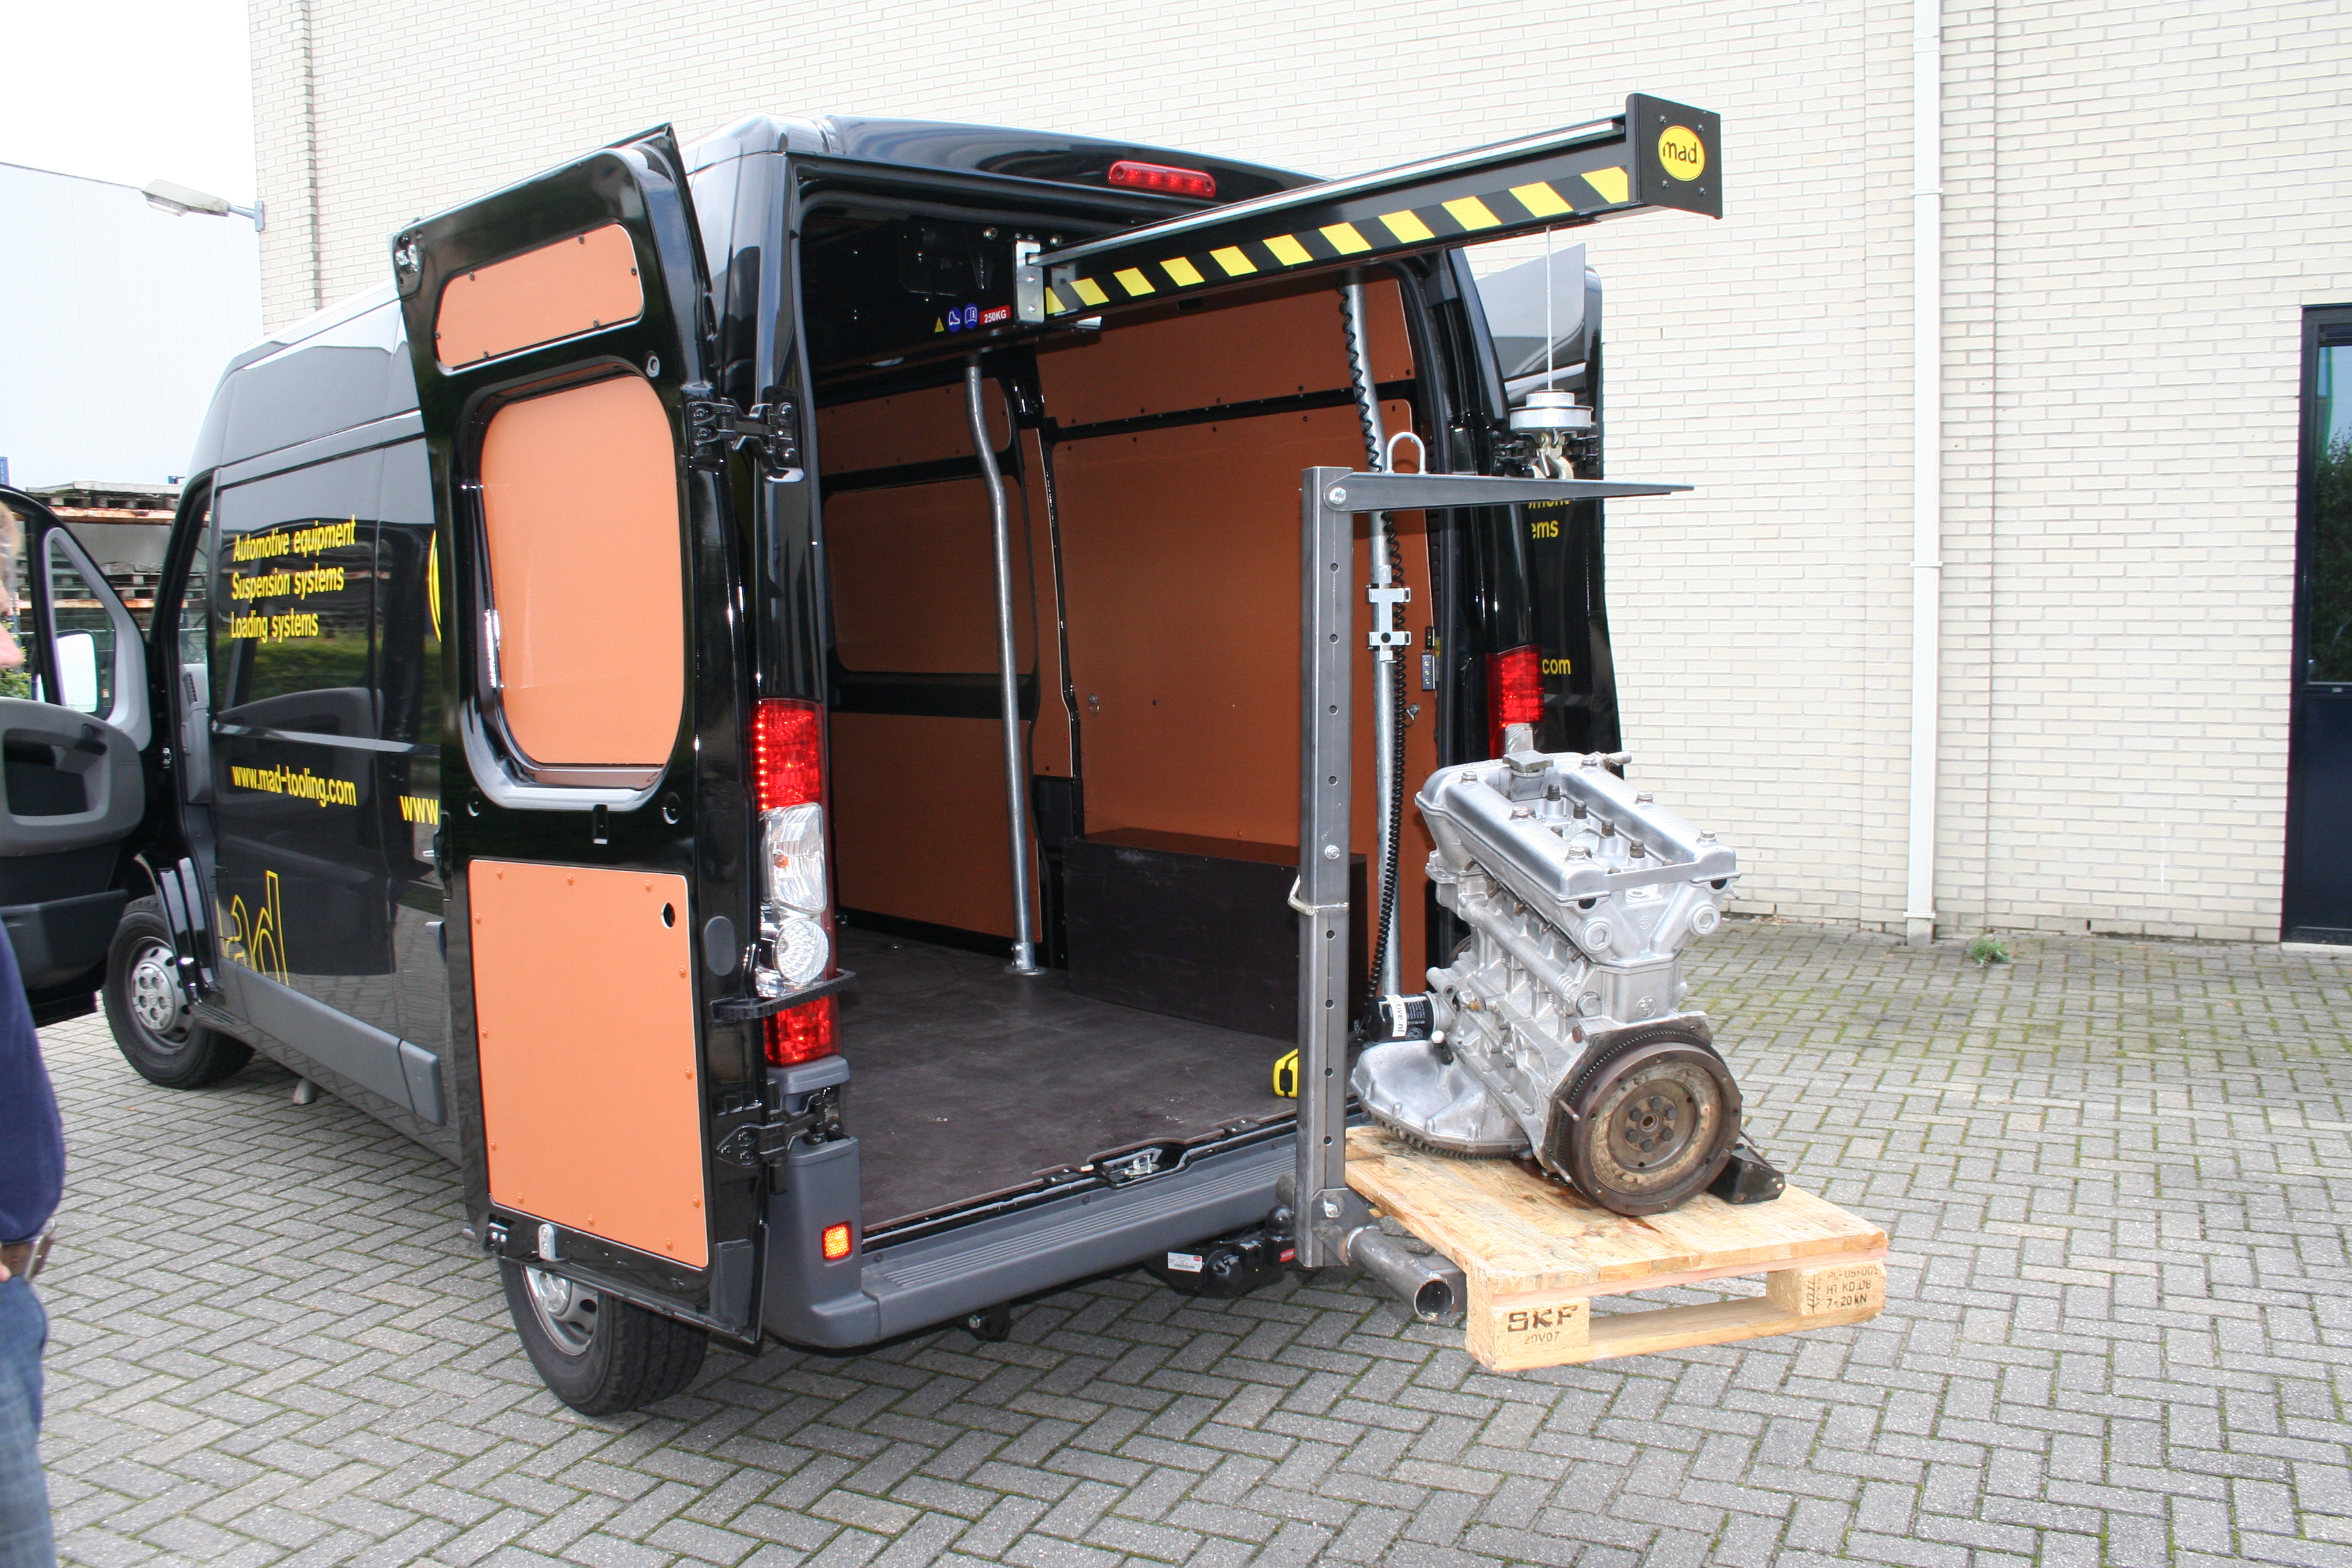 MAD EasyLoad crane for Lifting, handling and loading pallets into van